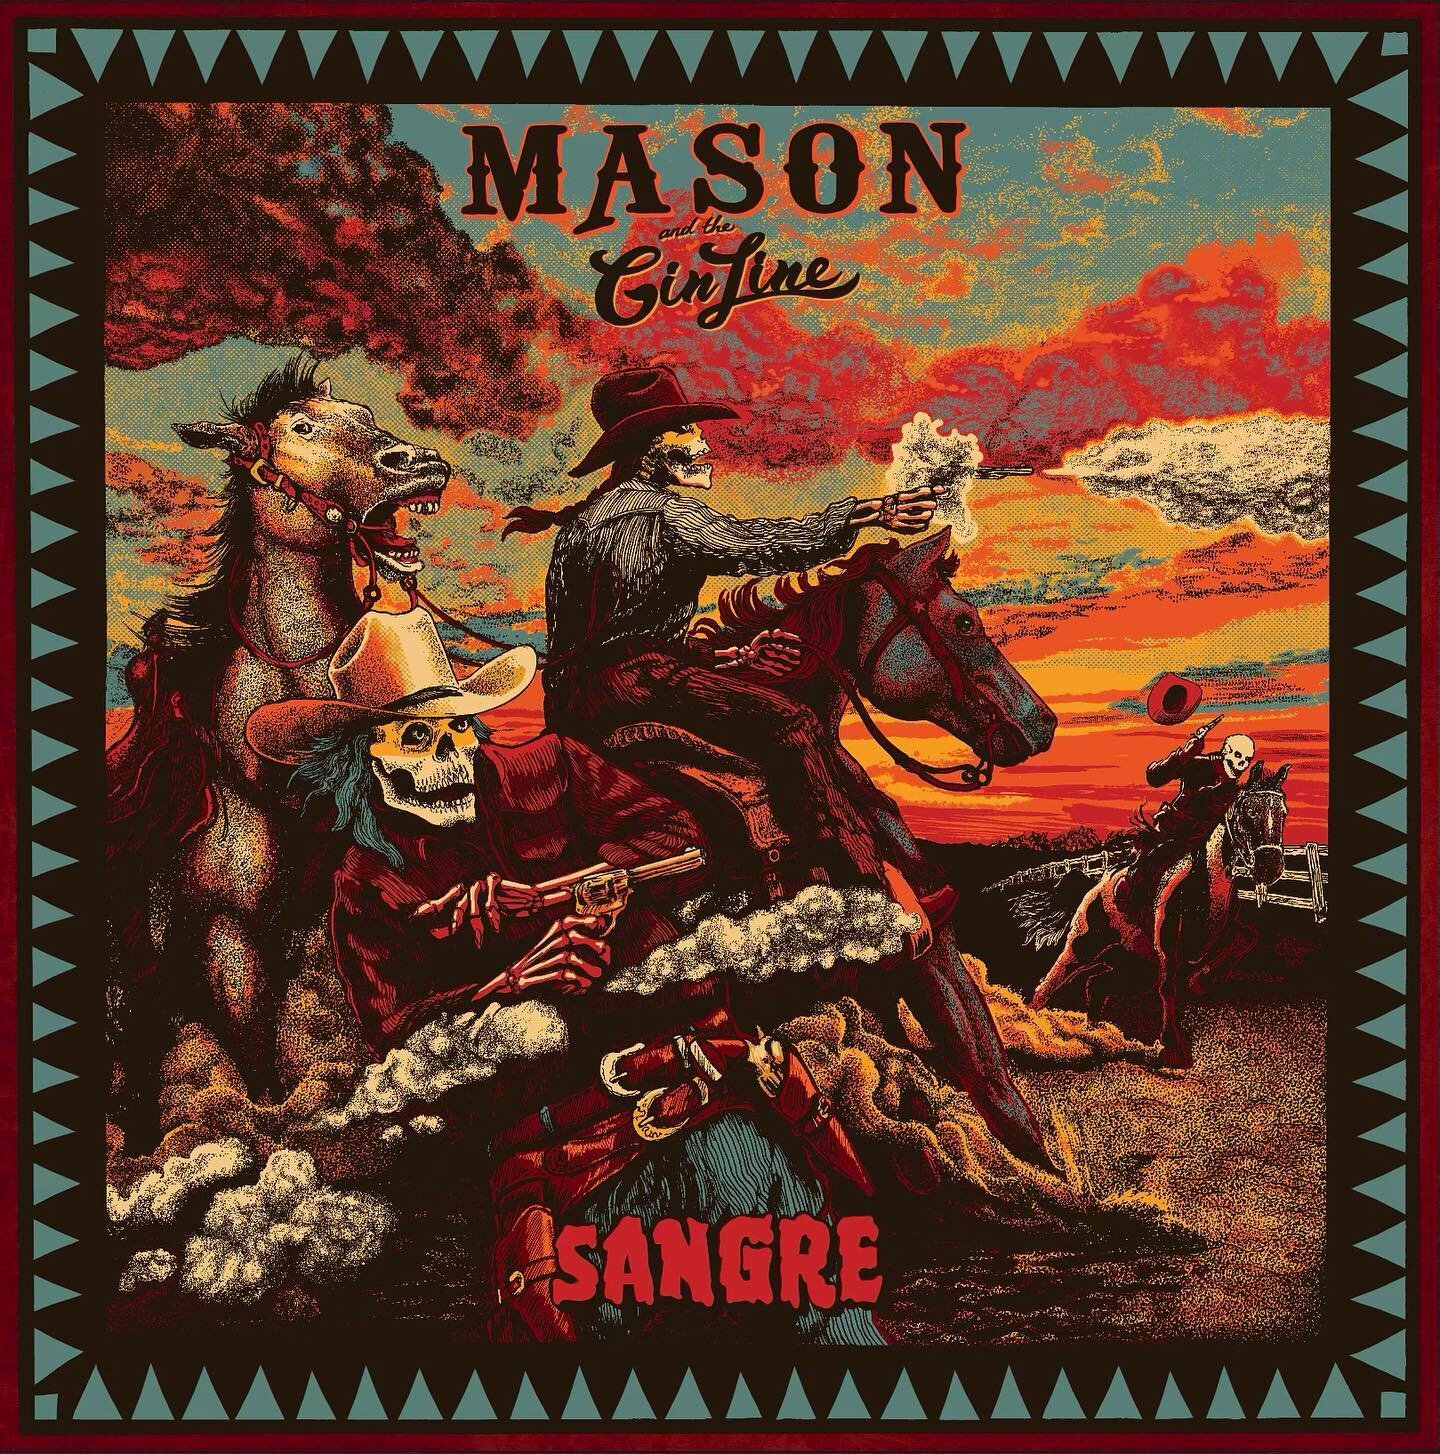 It started as a an acoustic demo from an old friend during 2020, that turned into a full fledged banger of a rock tune. An ep and a handful of singles later we&rsquo;re at the release day for the debut full length record by @masonandtheginline. Mason